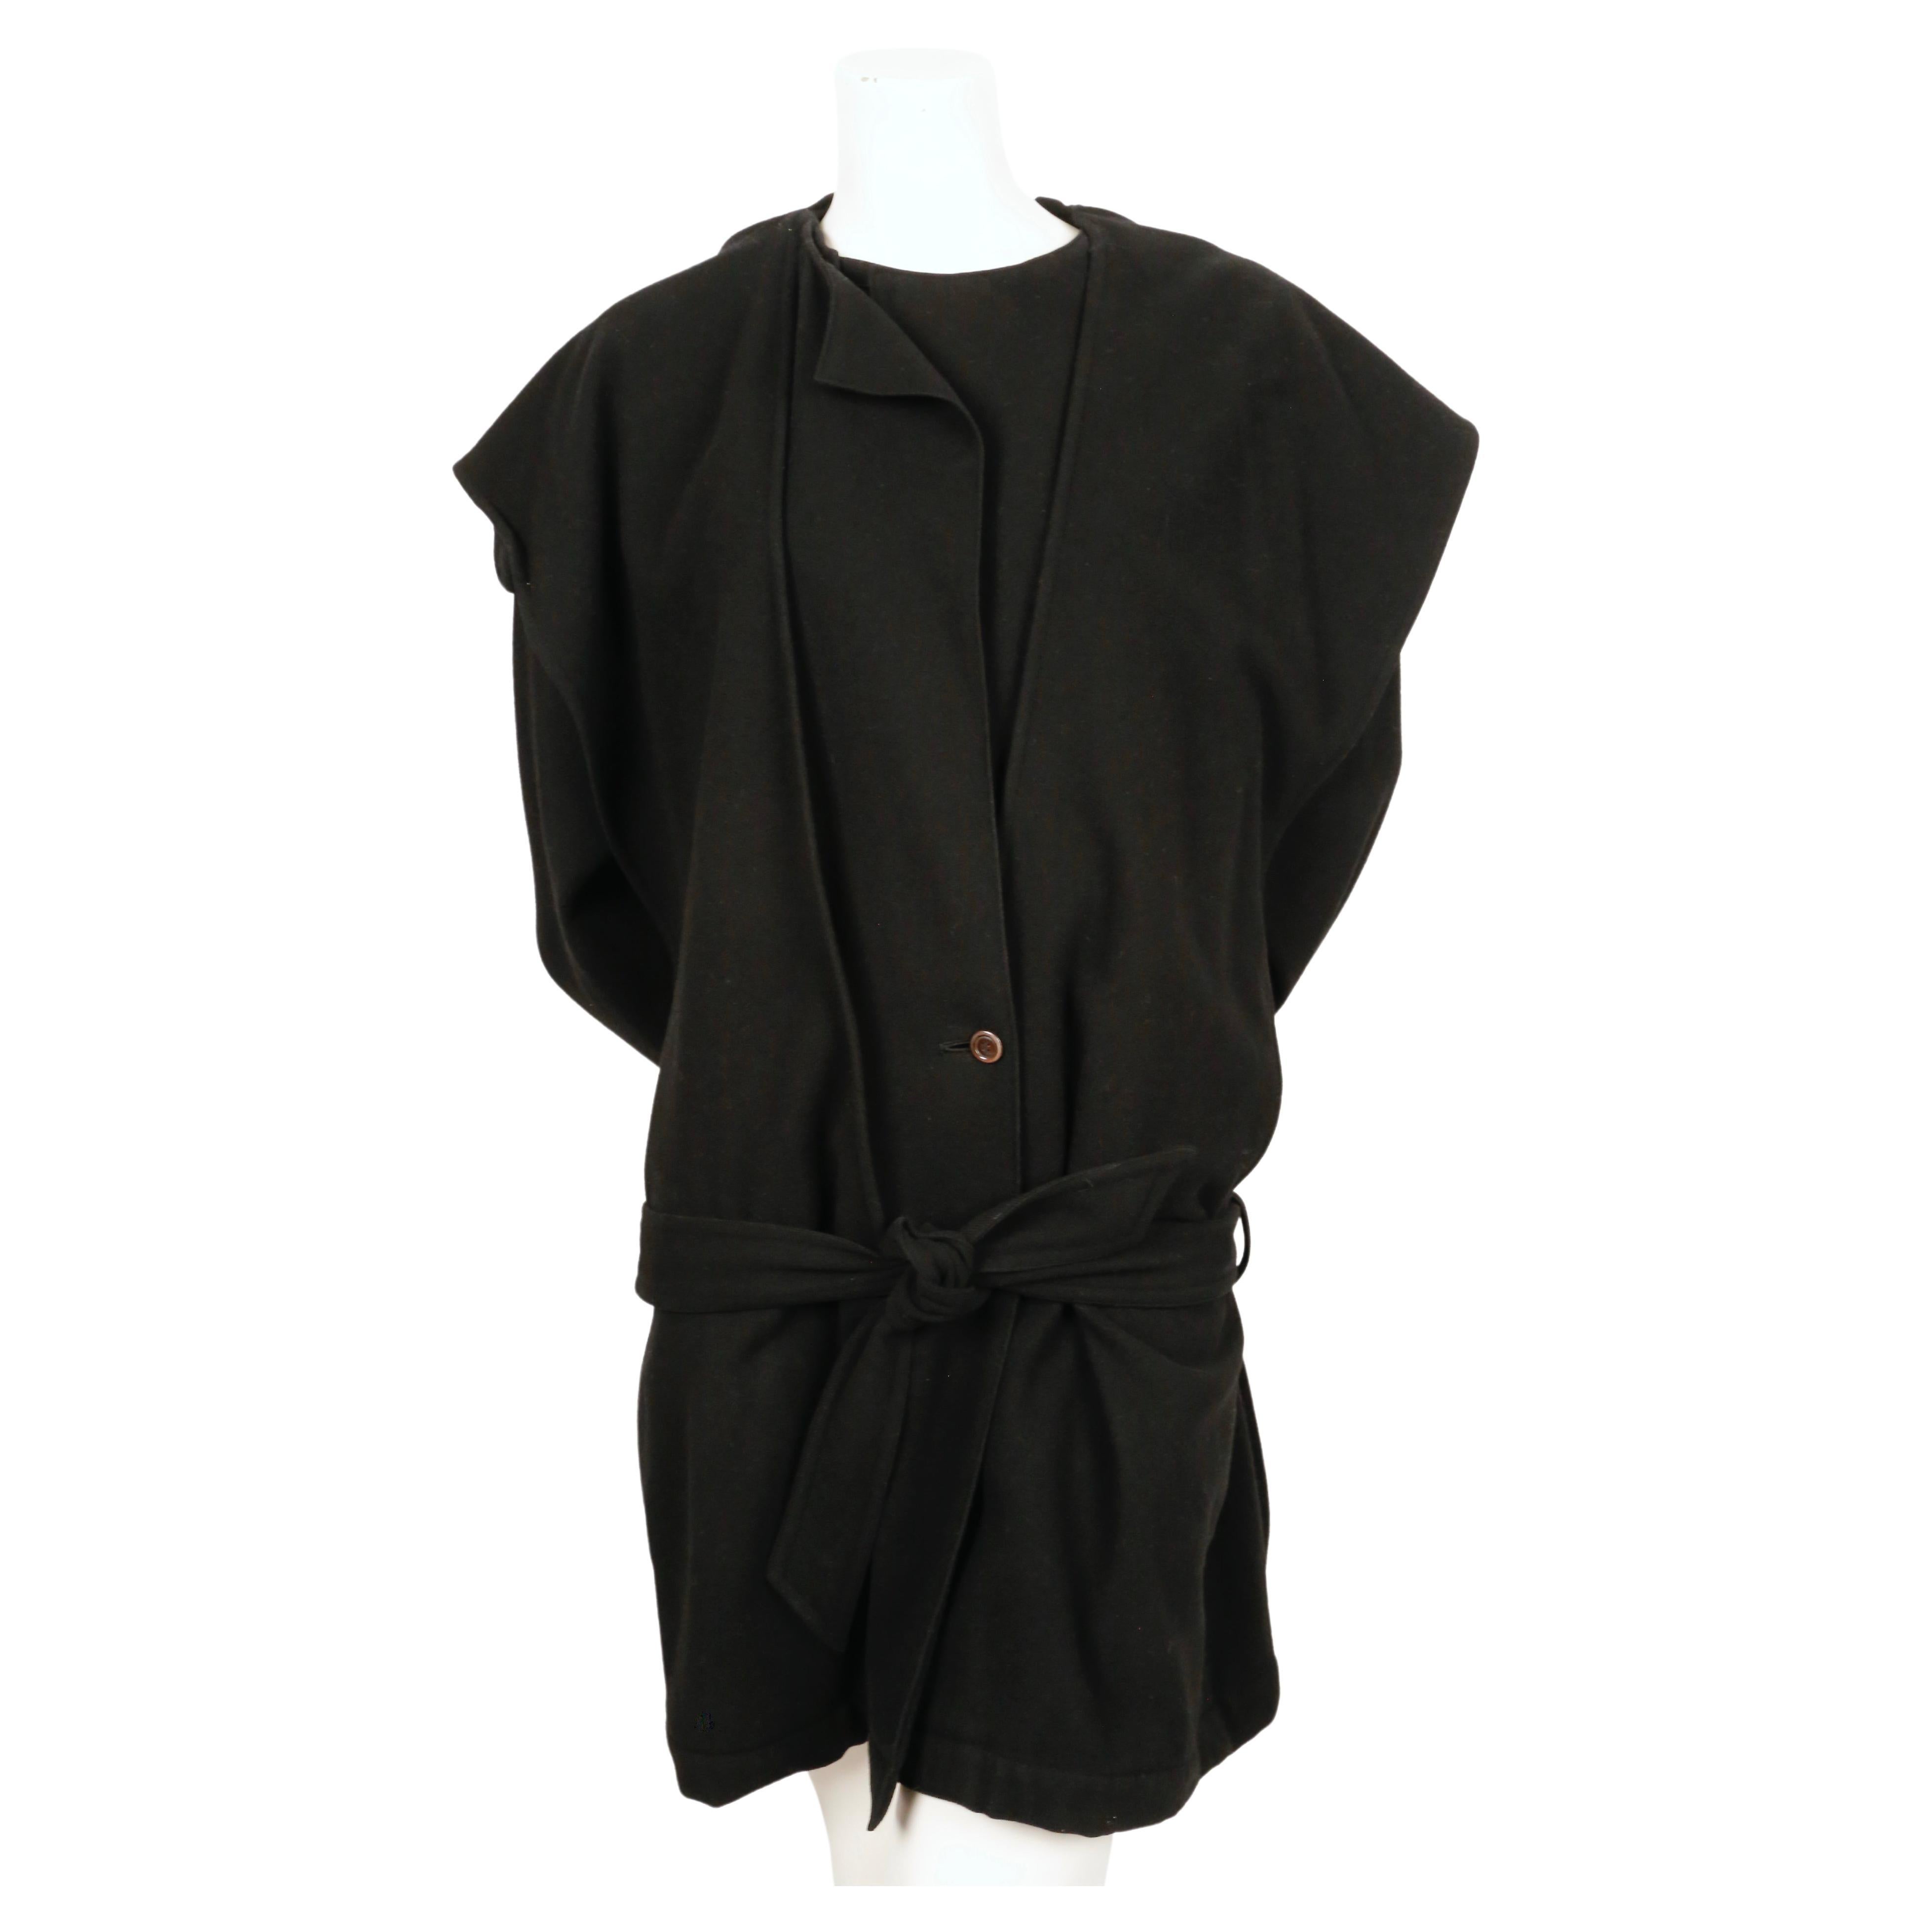 Black wool coat with a draped hood and low waist tie designed by Issey Miyake dating to the 1981 exactly as seen worn by Iman on the runway. Coat has a very unique cut to it. Size 'M'. Approximate measurements: drop shoulder 22